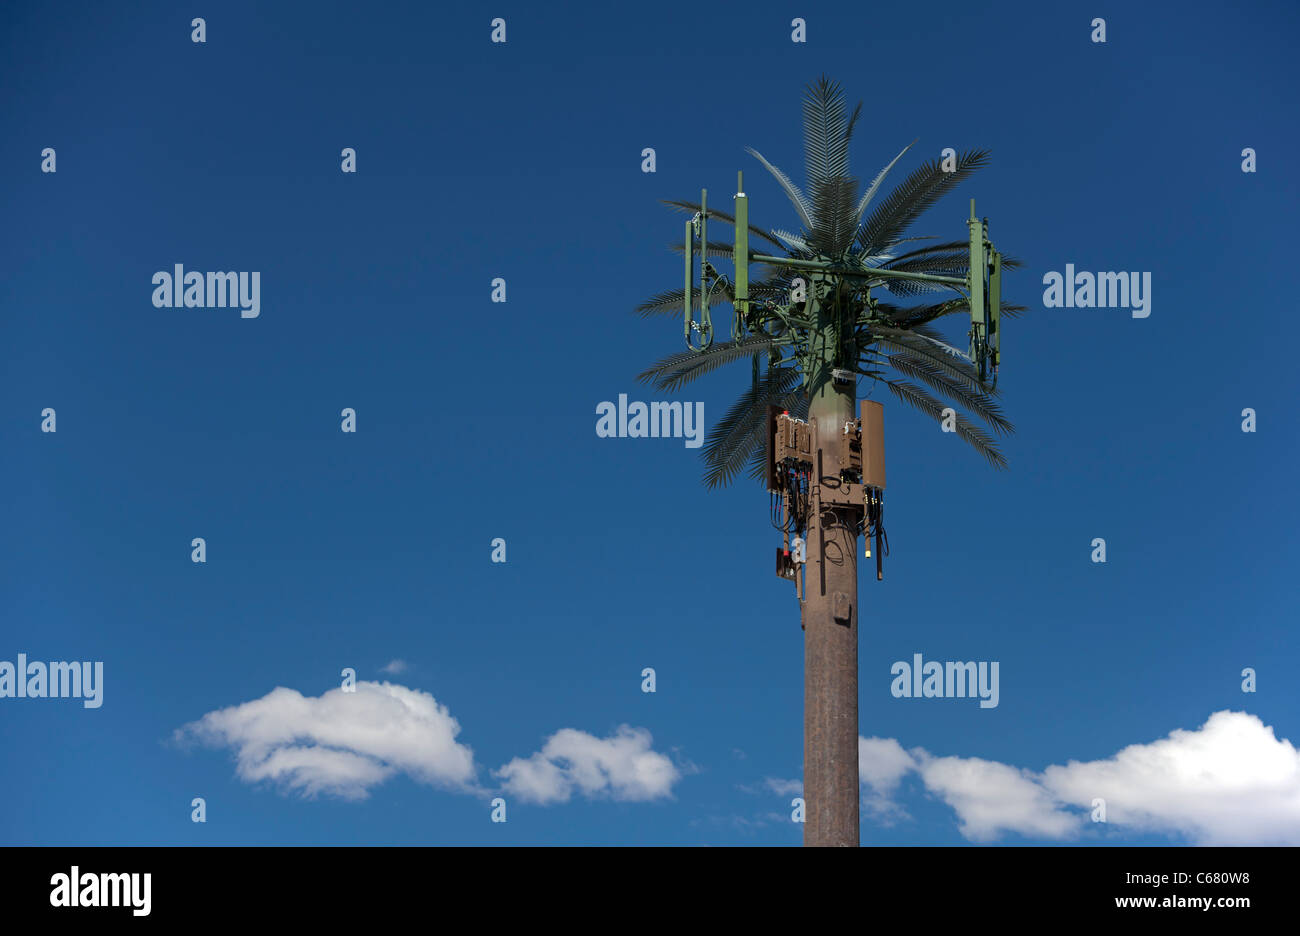 Las Vegas, Nevada - A cell phone tower disguised as a palm tree. Stock Photo